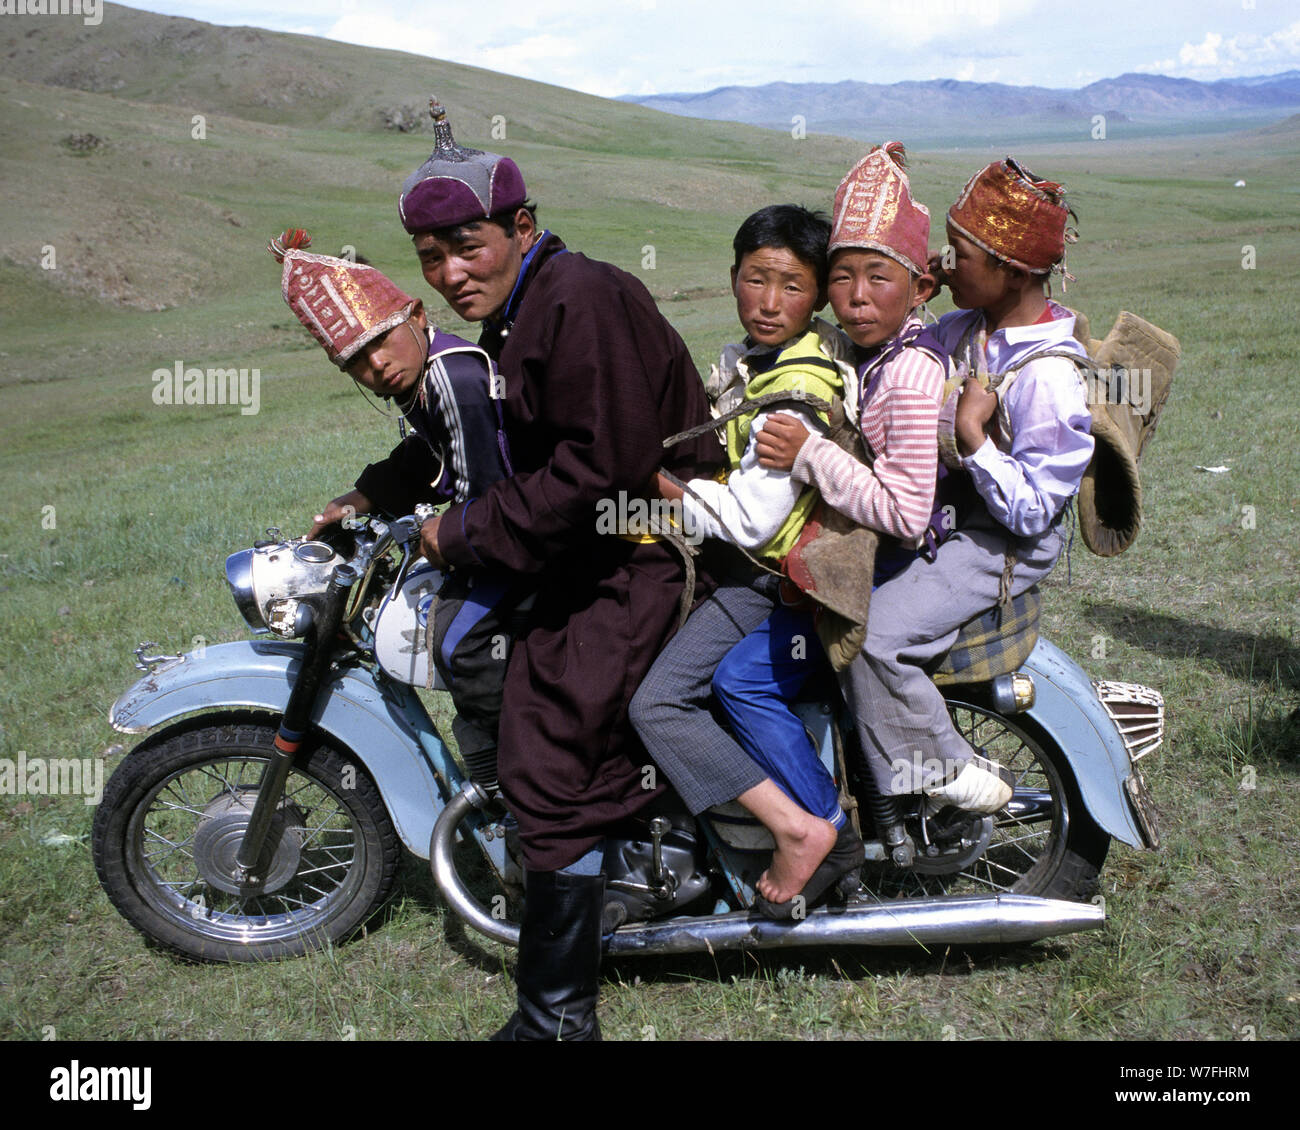 5 Mongolians riding a motorbike during the Nadaam festival Stock Photo